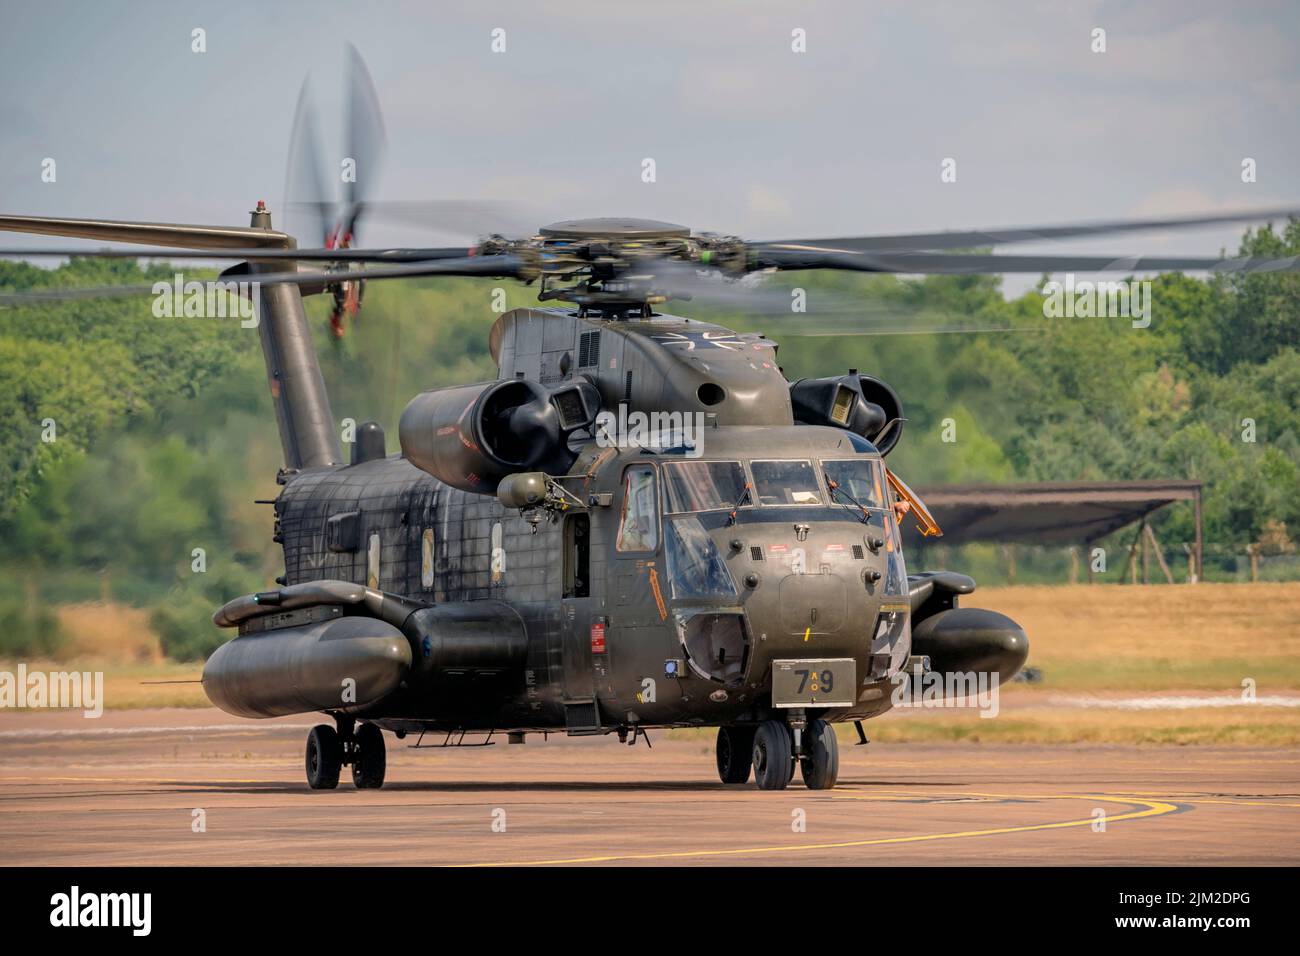 German Air Force, Sikorsky CH-53 Heavy Lift Transport Helicopter arrival at the Royal International Air Tattoo for static display. Stock Photo